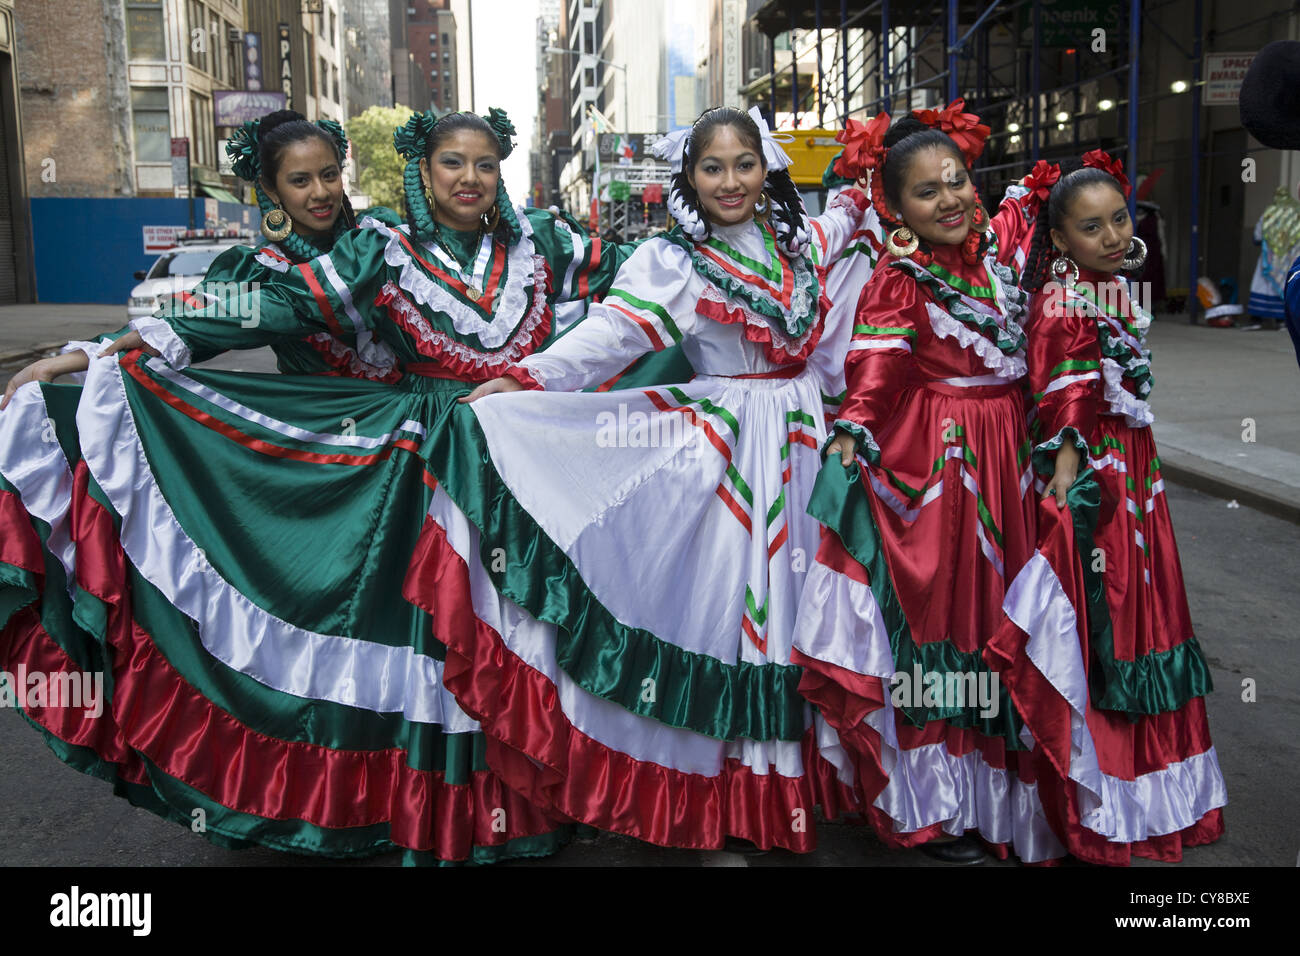 Hispanic Day Parade, New York City. Mexican Dancers ready to march up